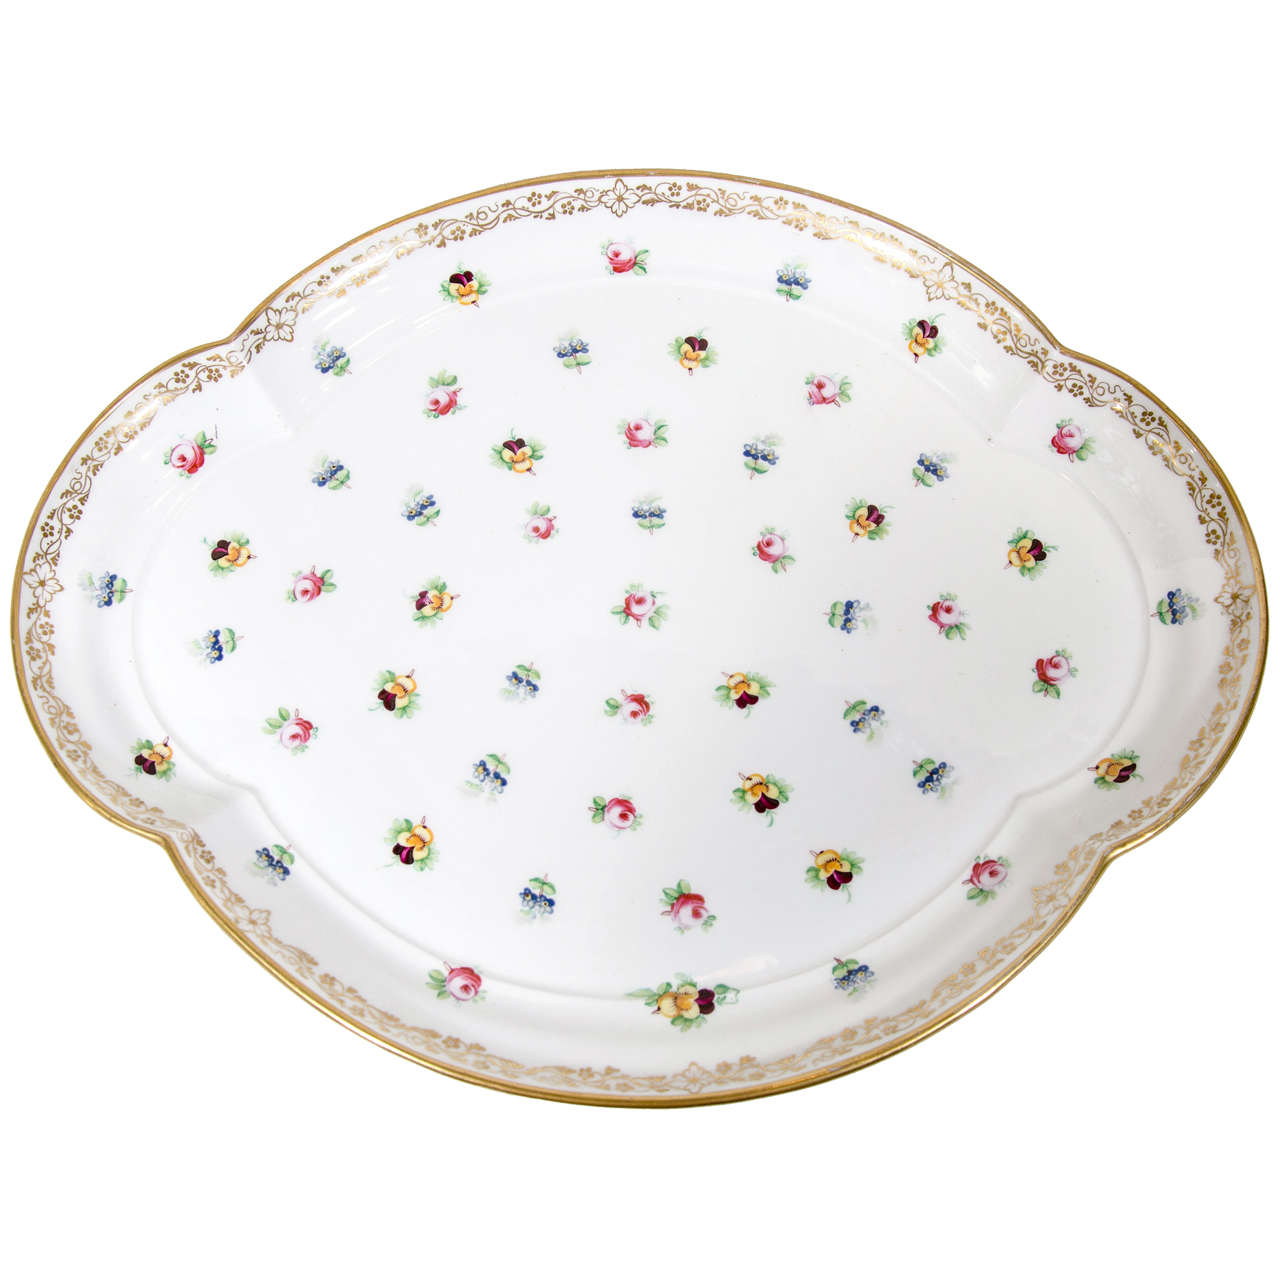 Antique Porcelain Serving Tray Decorated with Pink Roses and Pansies